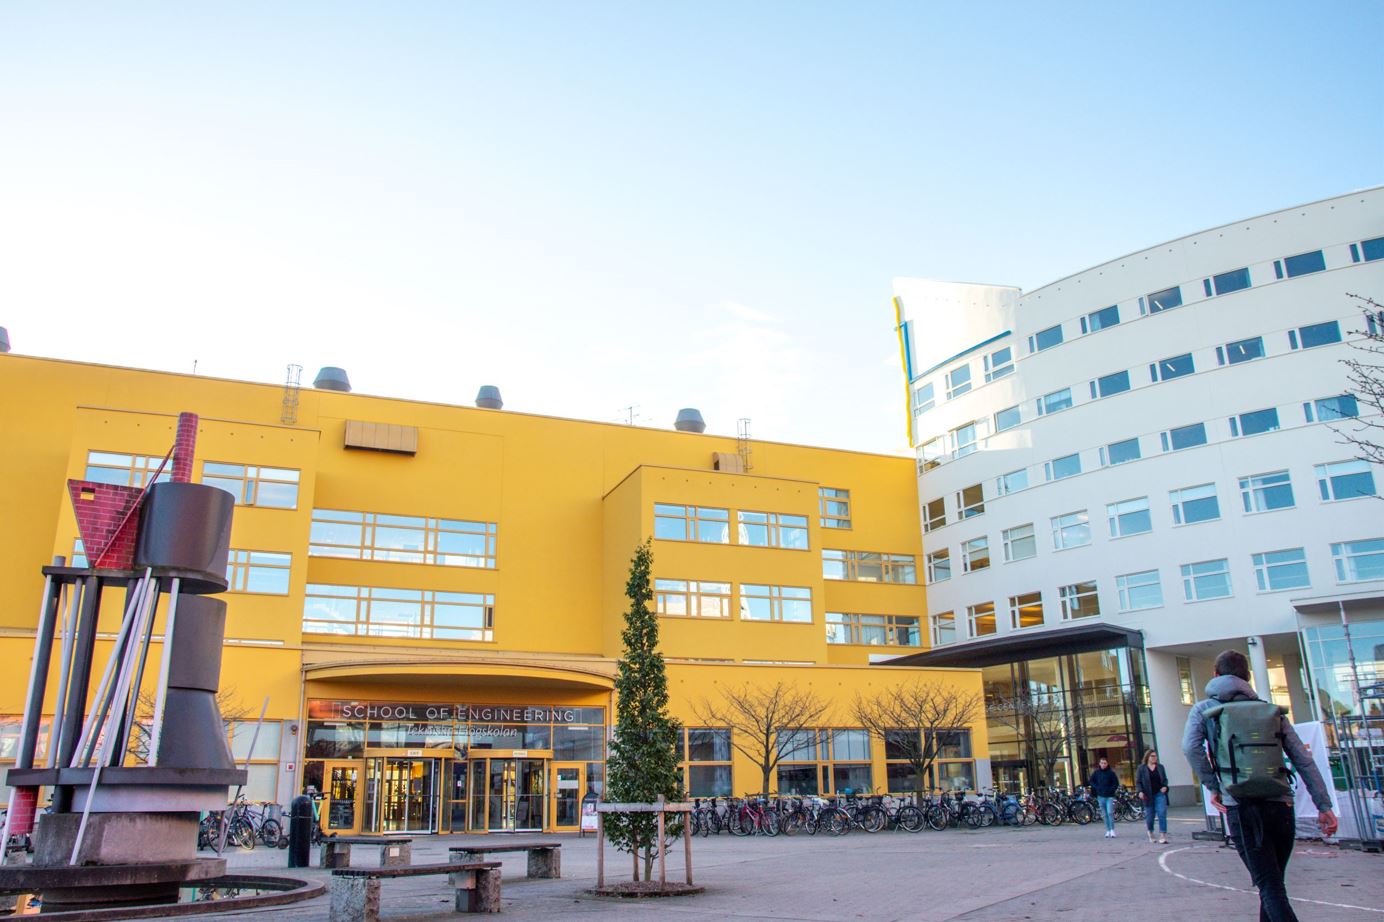 A picture of the School of Engineering at Jönköping University.